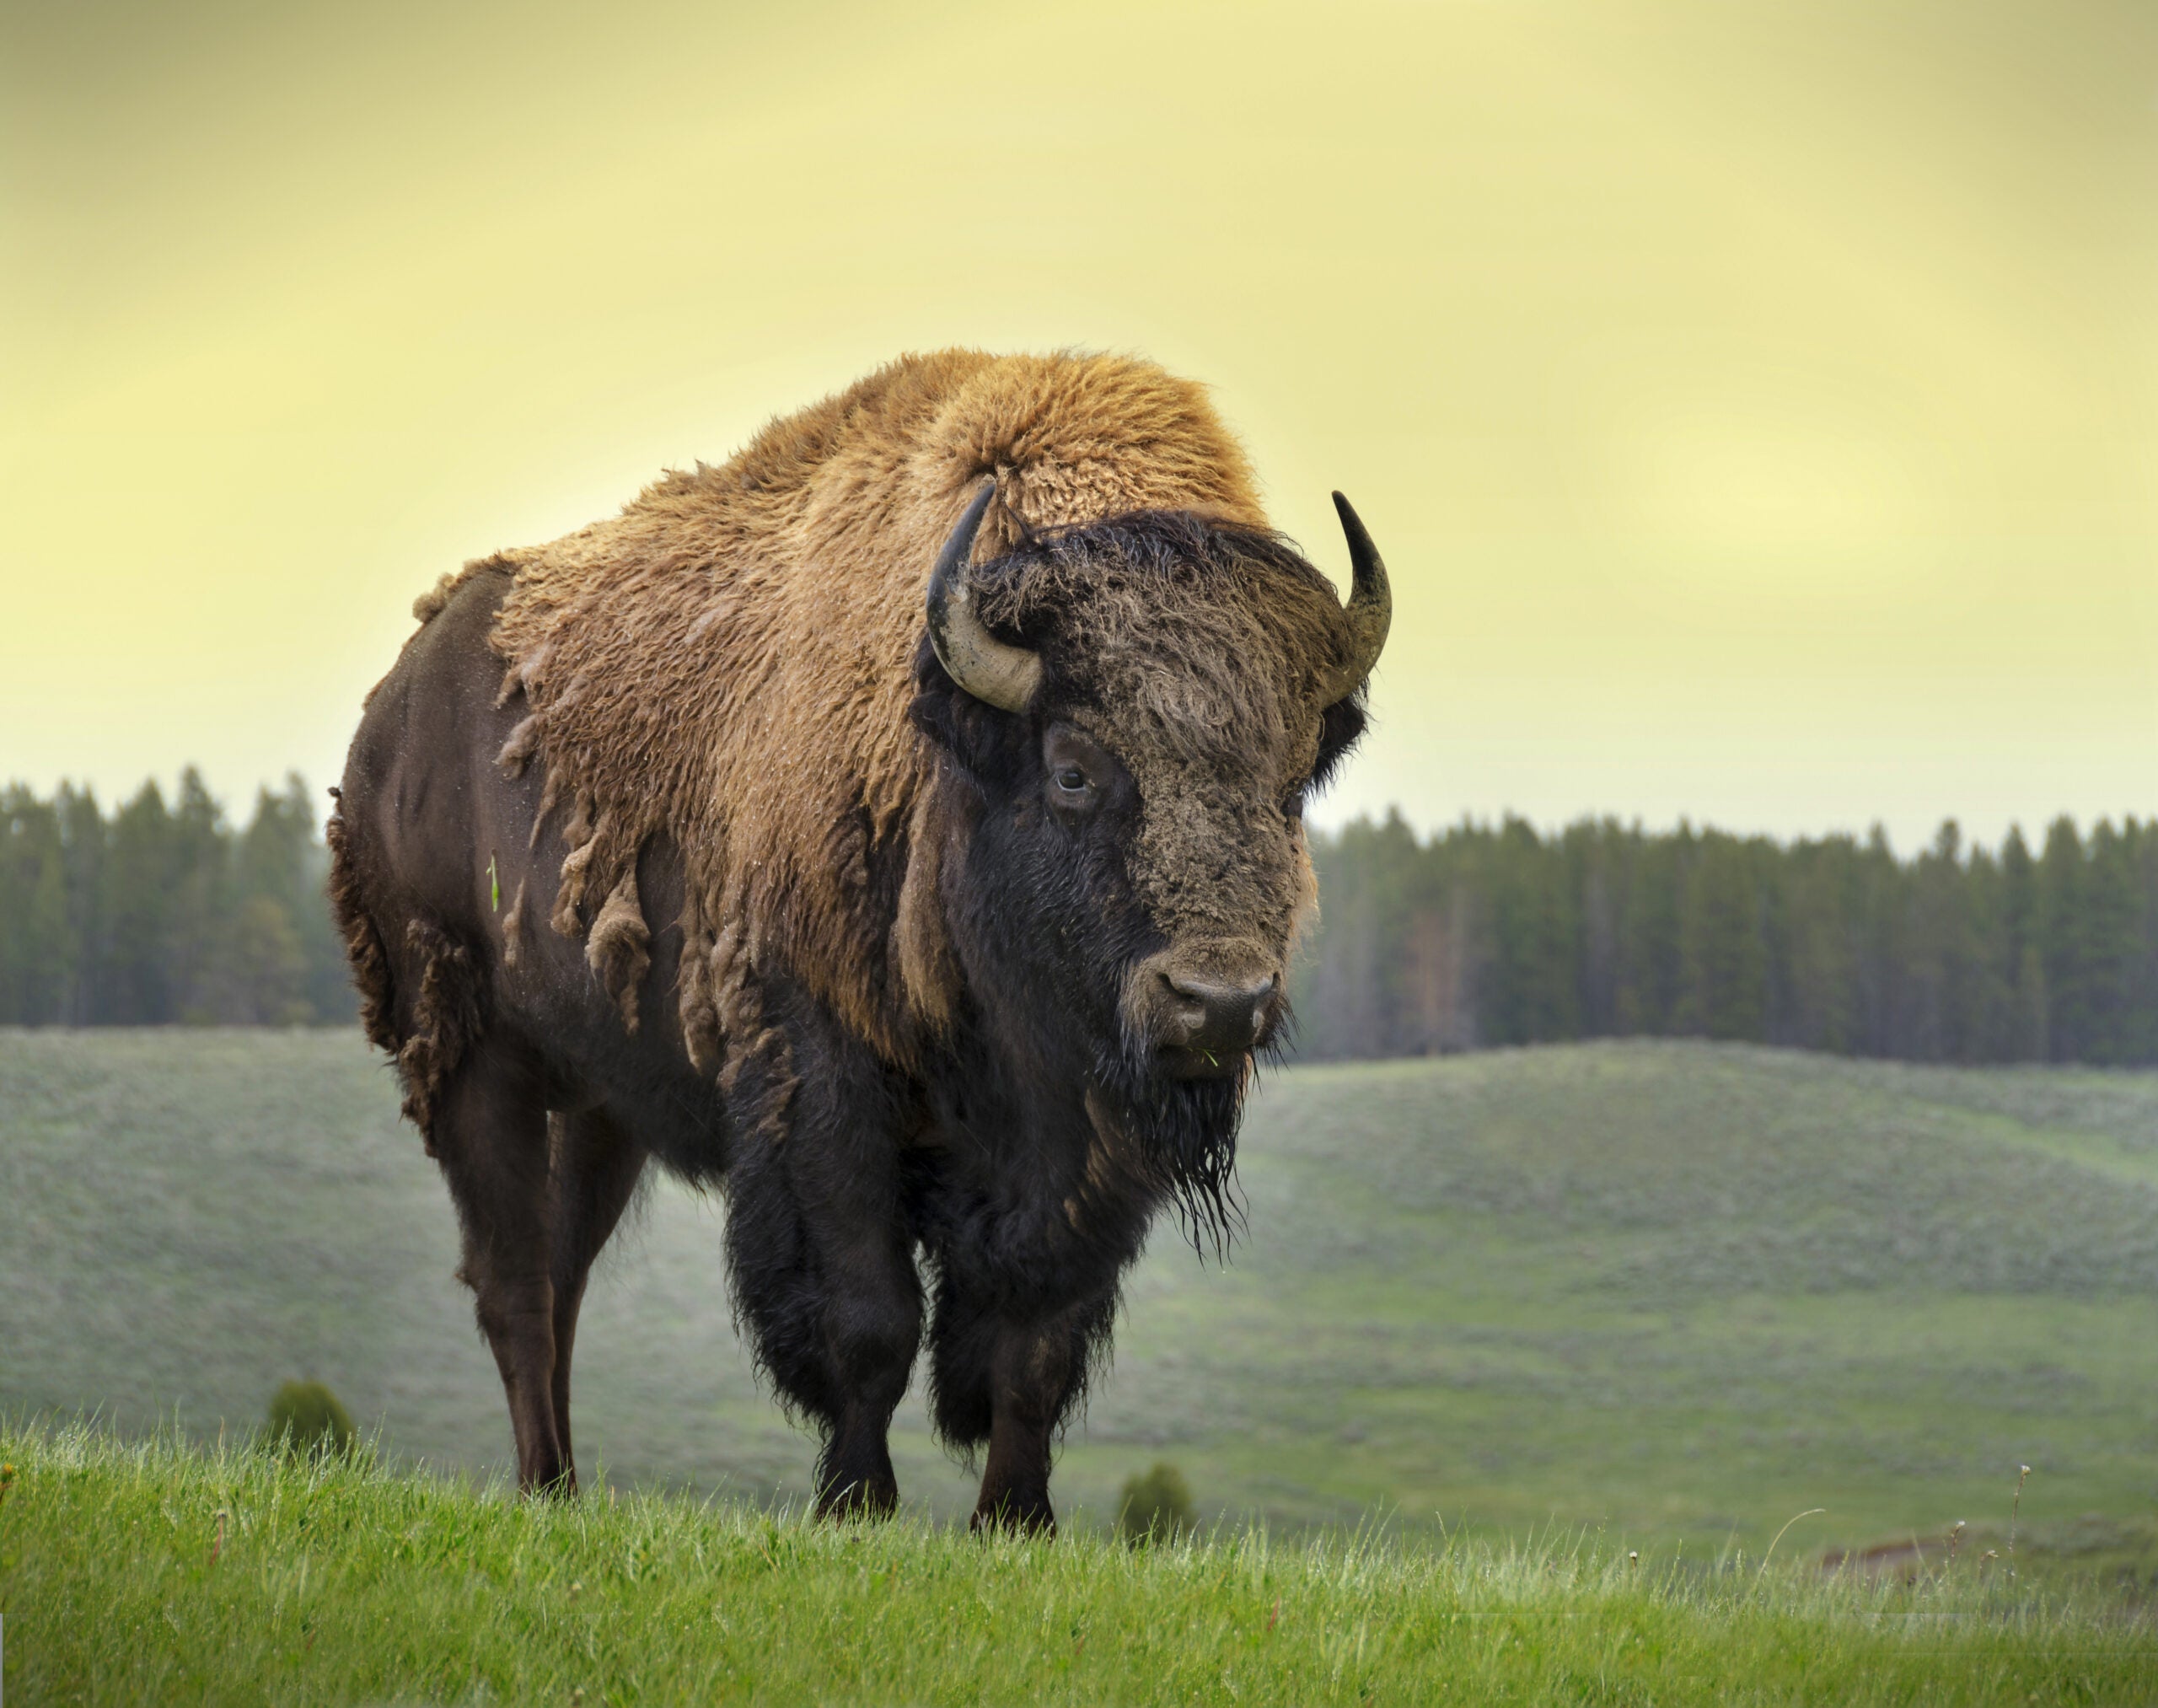 Protection of wildlife is about preserving what remains special and mysterious about the world in which we live. The return of the American Bison to the Great Plains is a victory for preserving our American heritage.
(Sergio Boccardo / Shutterstock)